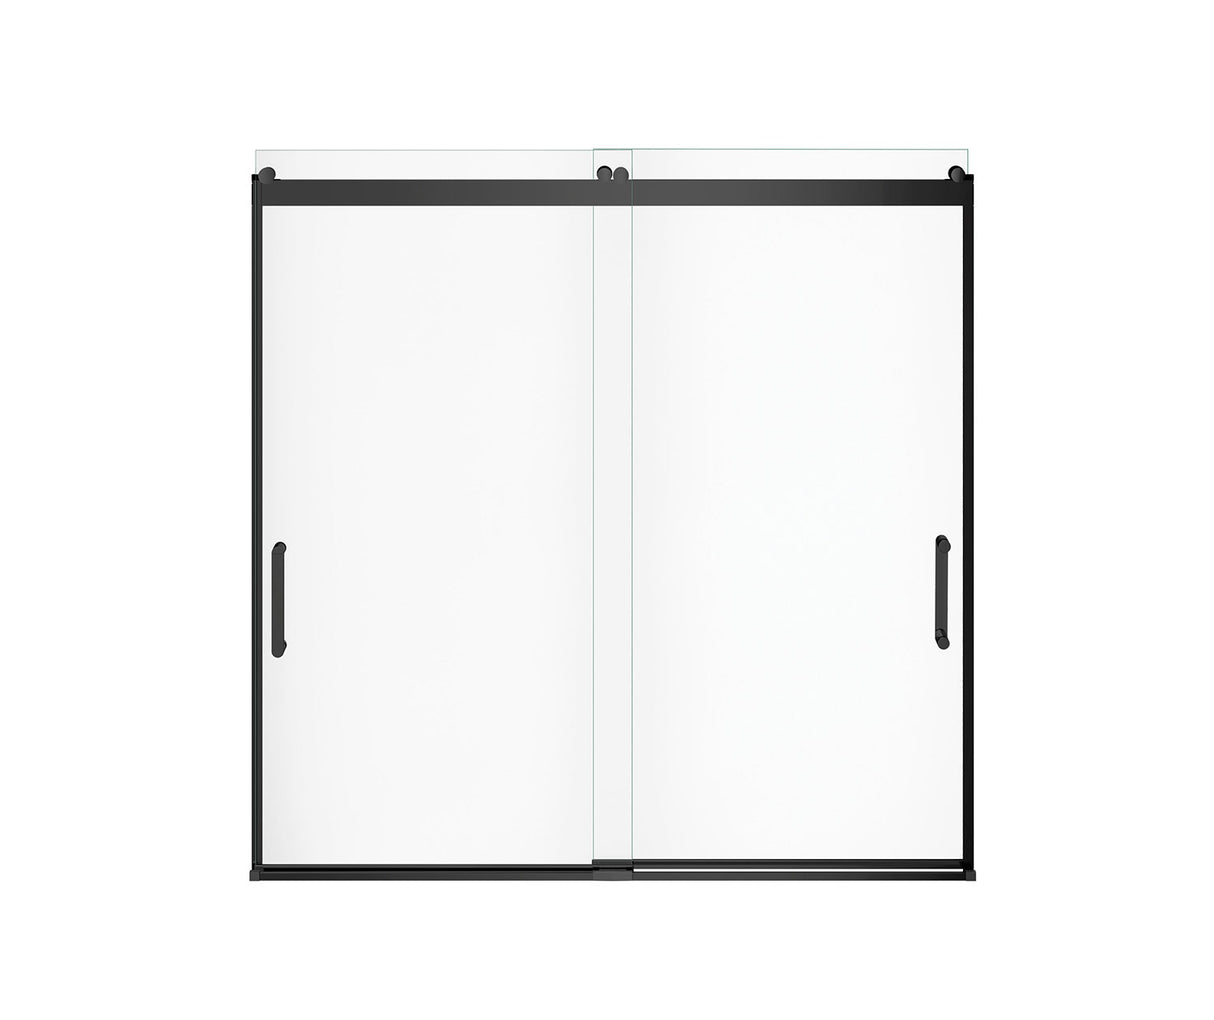 MAAX 136695-900-340-000 Revelation Round 56-59 x 56 ¾-59 ¼ in. 8mm Bypass Tub Door for Alcove Installation with Clear glass in Matte Black